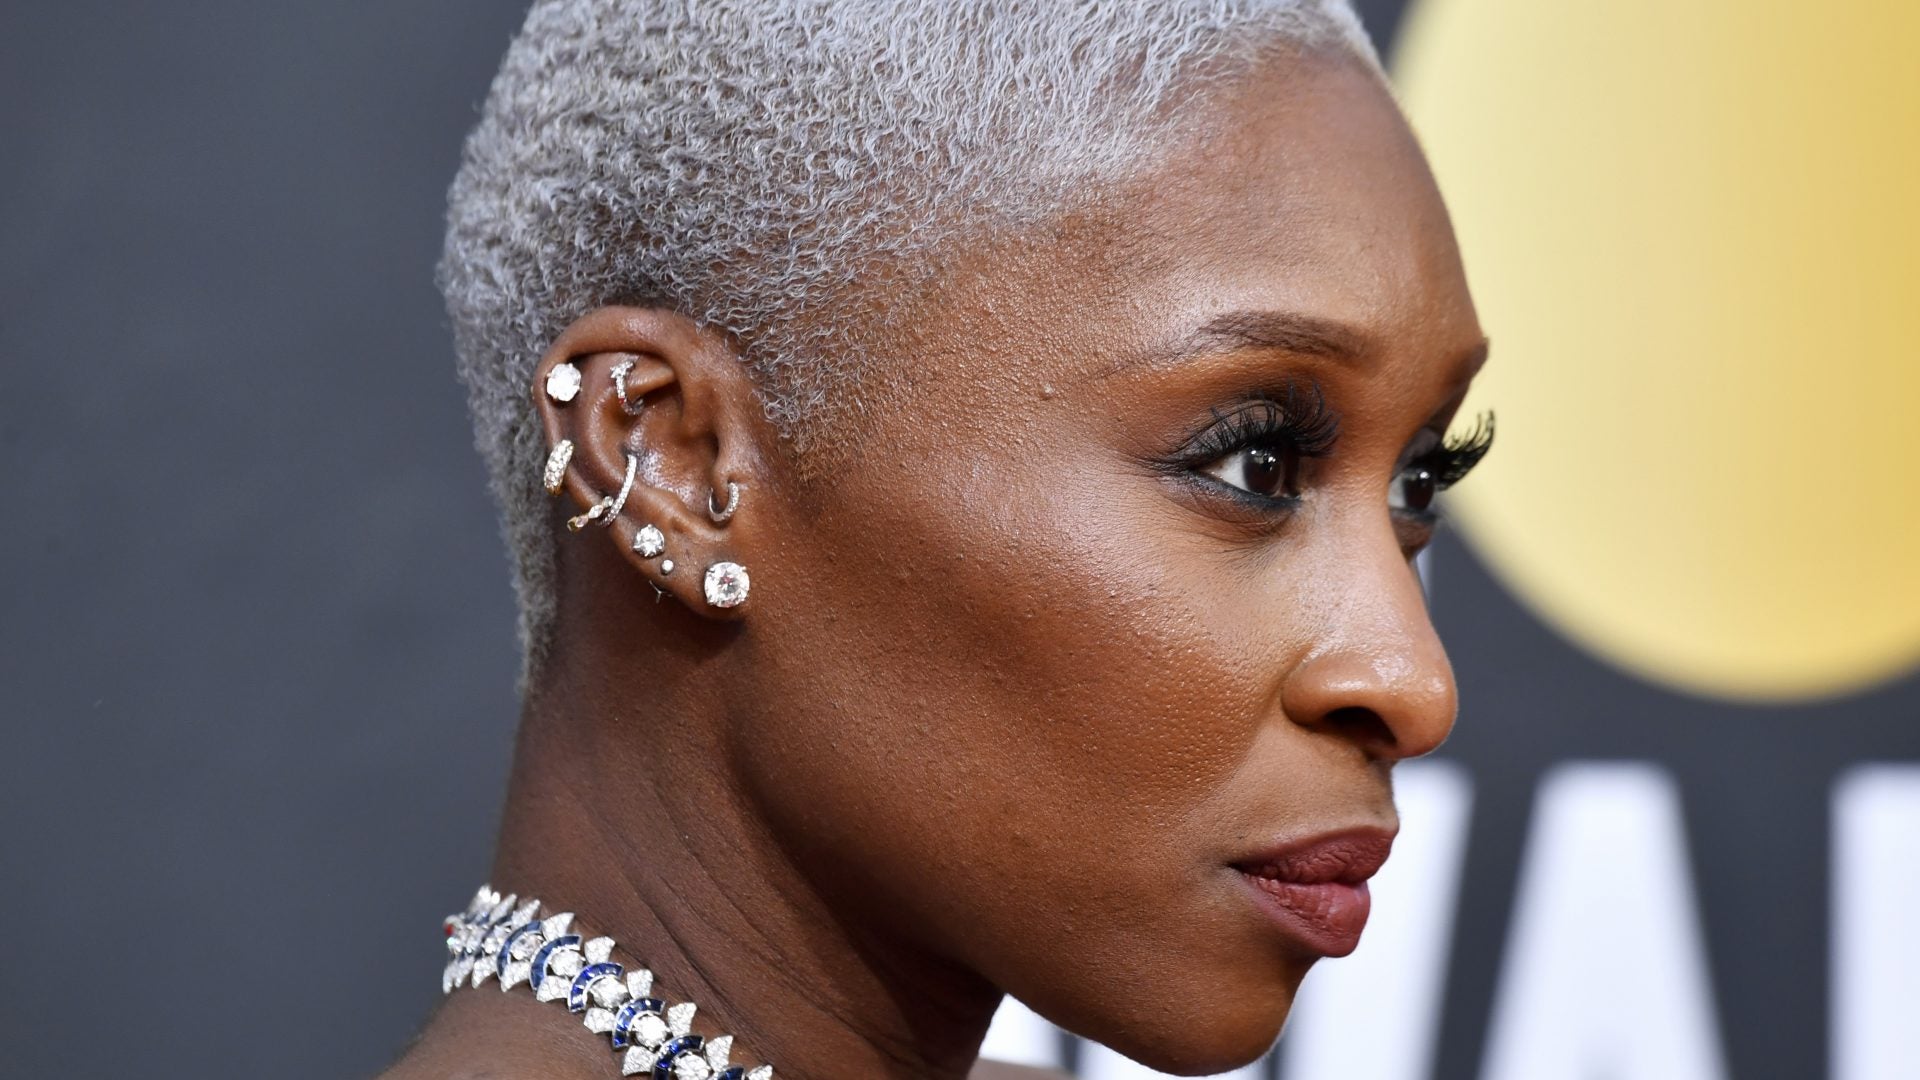 Cynthia Erivo Is 'Disappointed' By All-White BAFTA Nominations, Confirms She Turned Down Opportunity To Perform